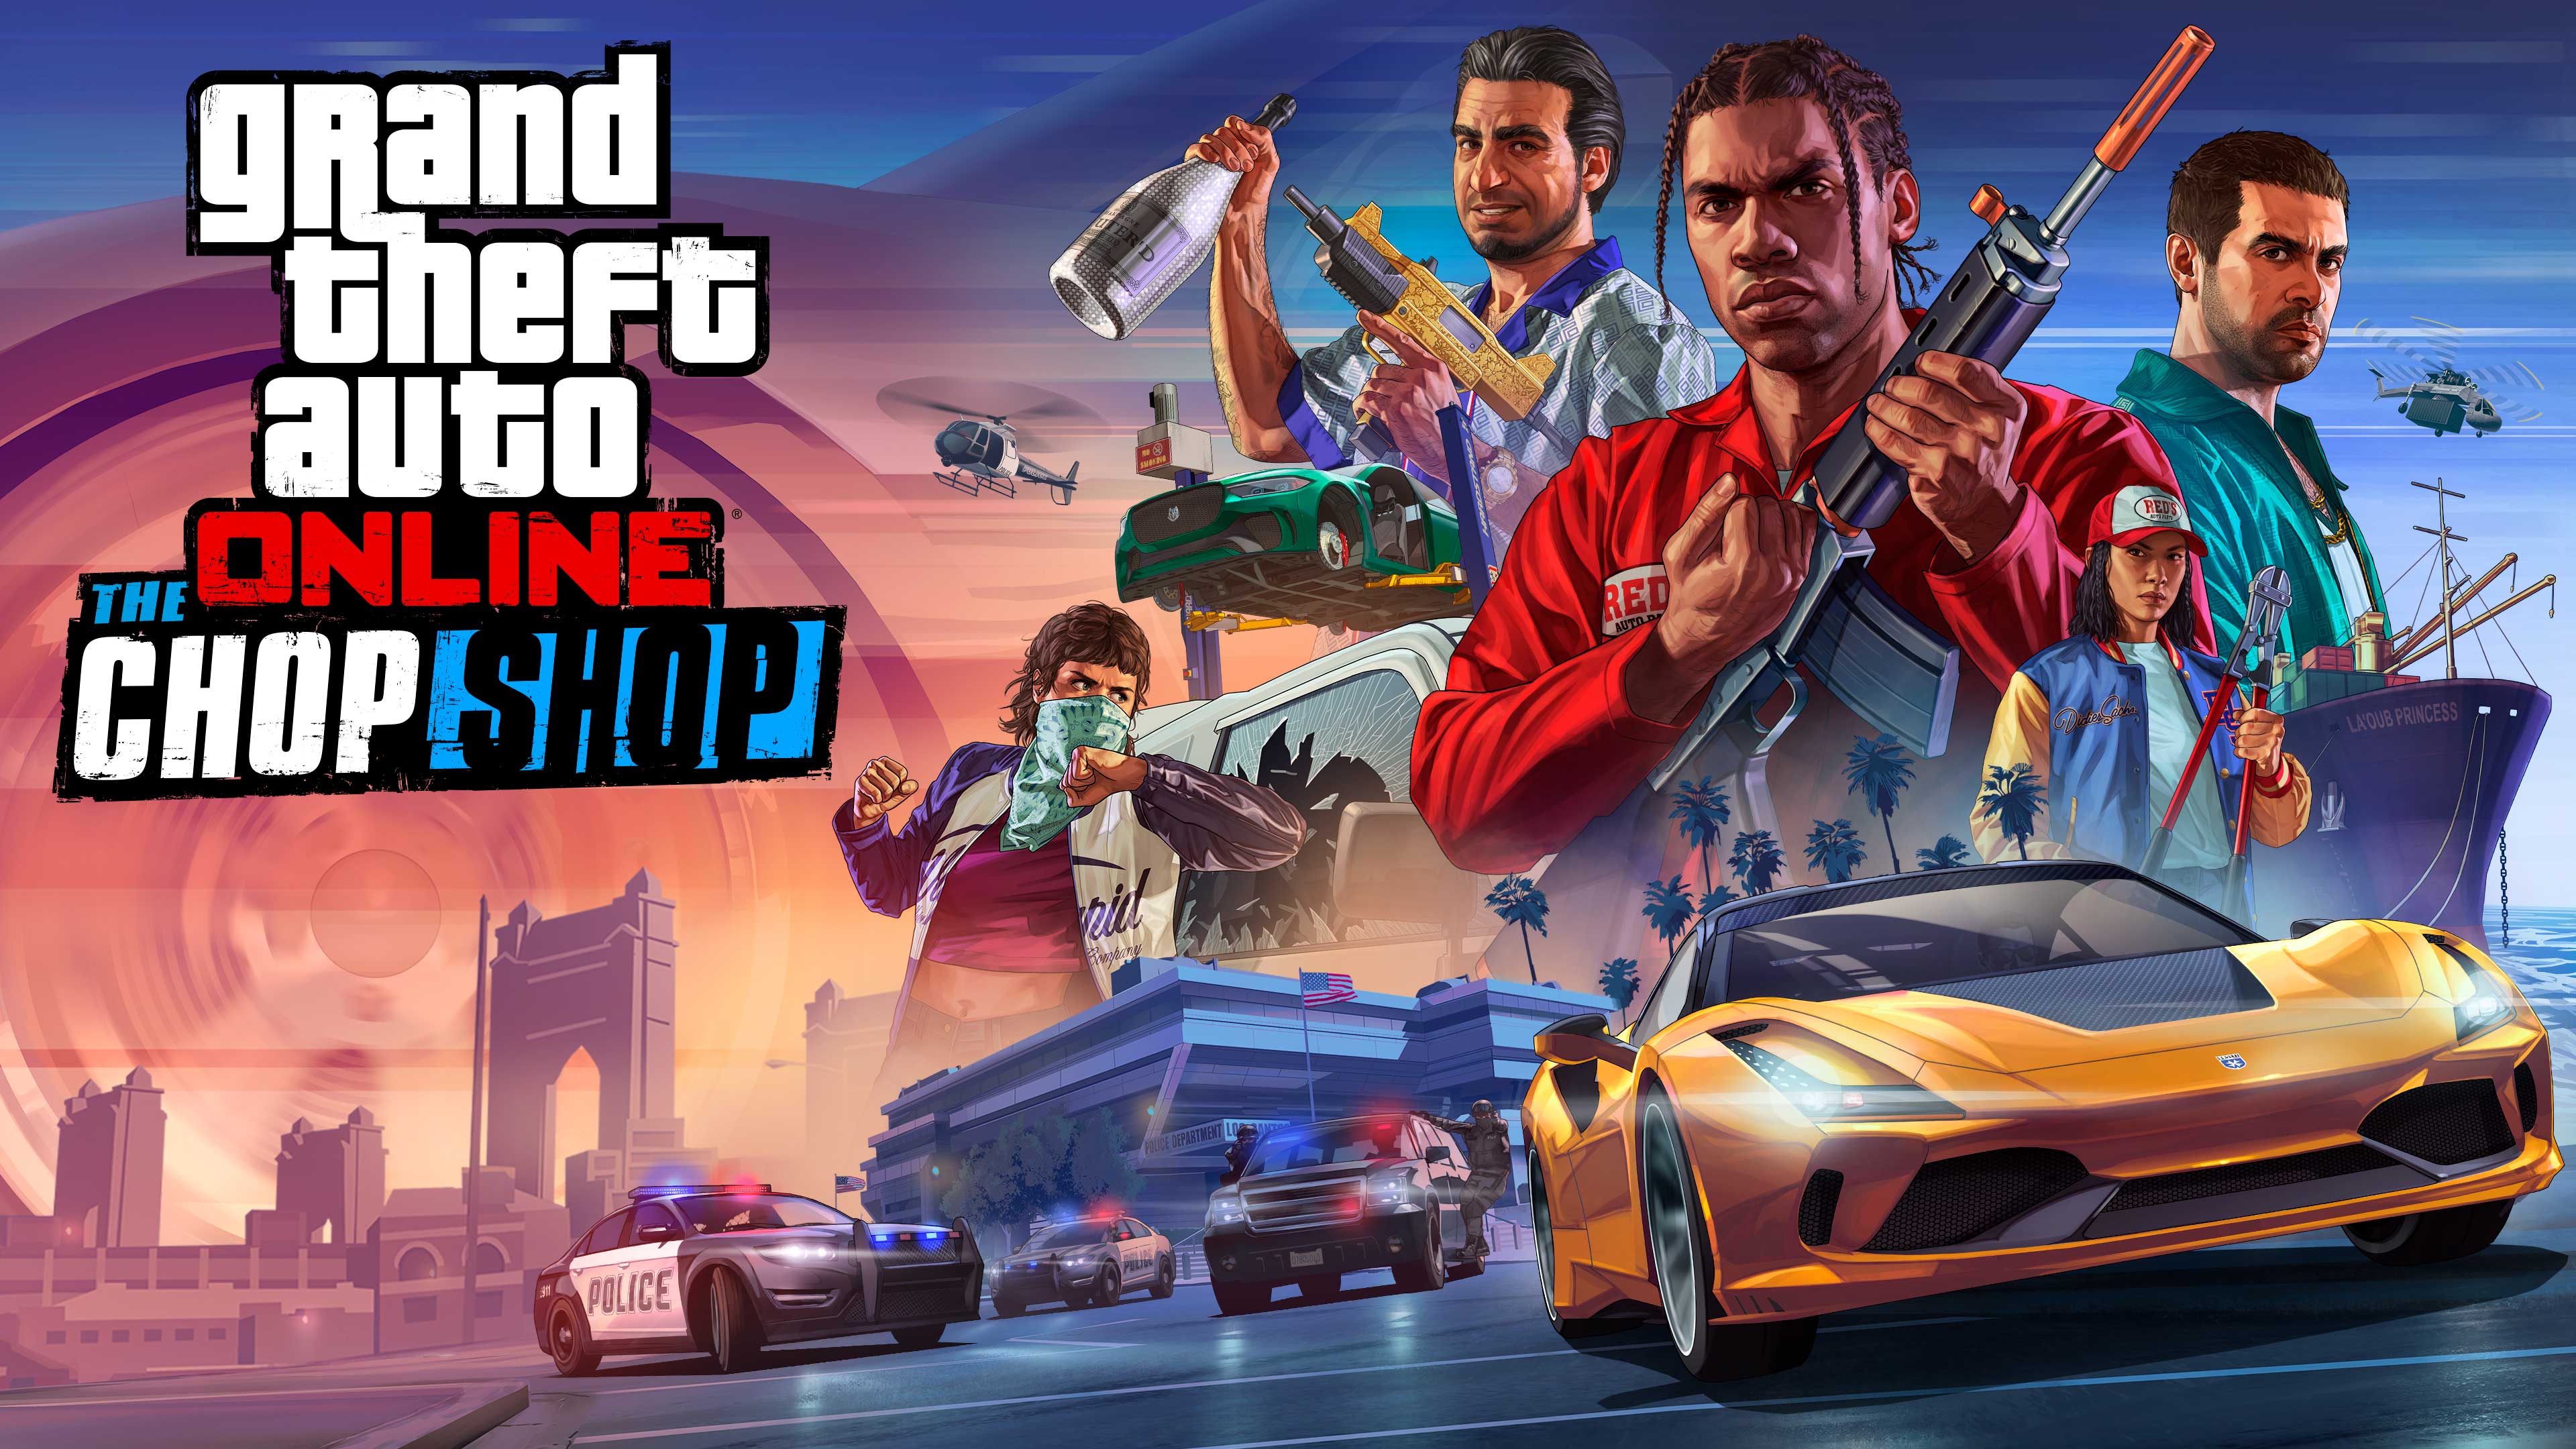 GTA Online: The Chop Shop Now Available - Rockstar Games